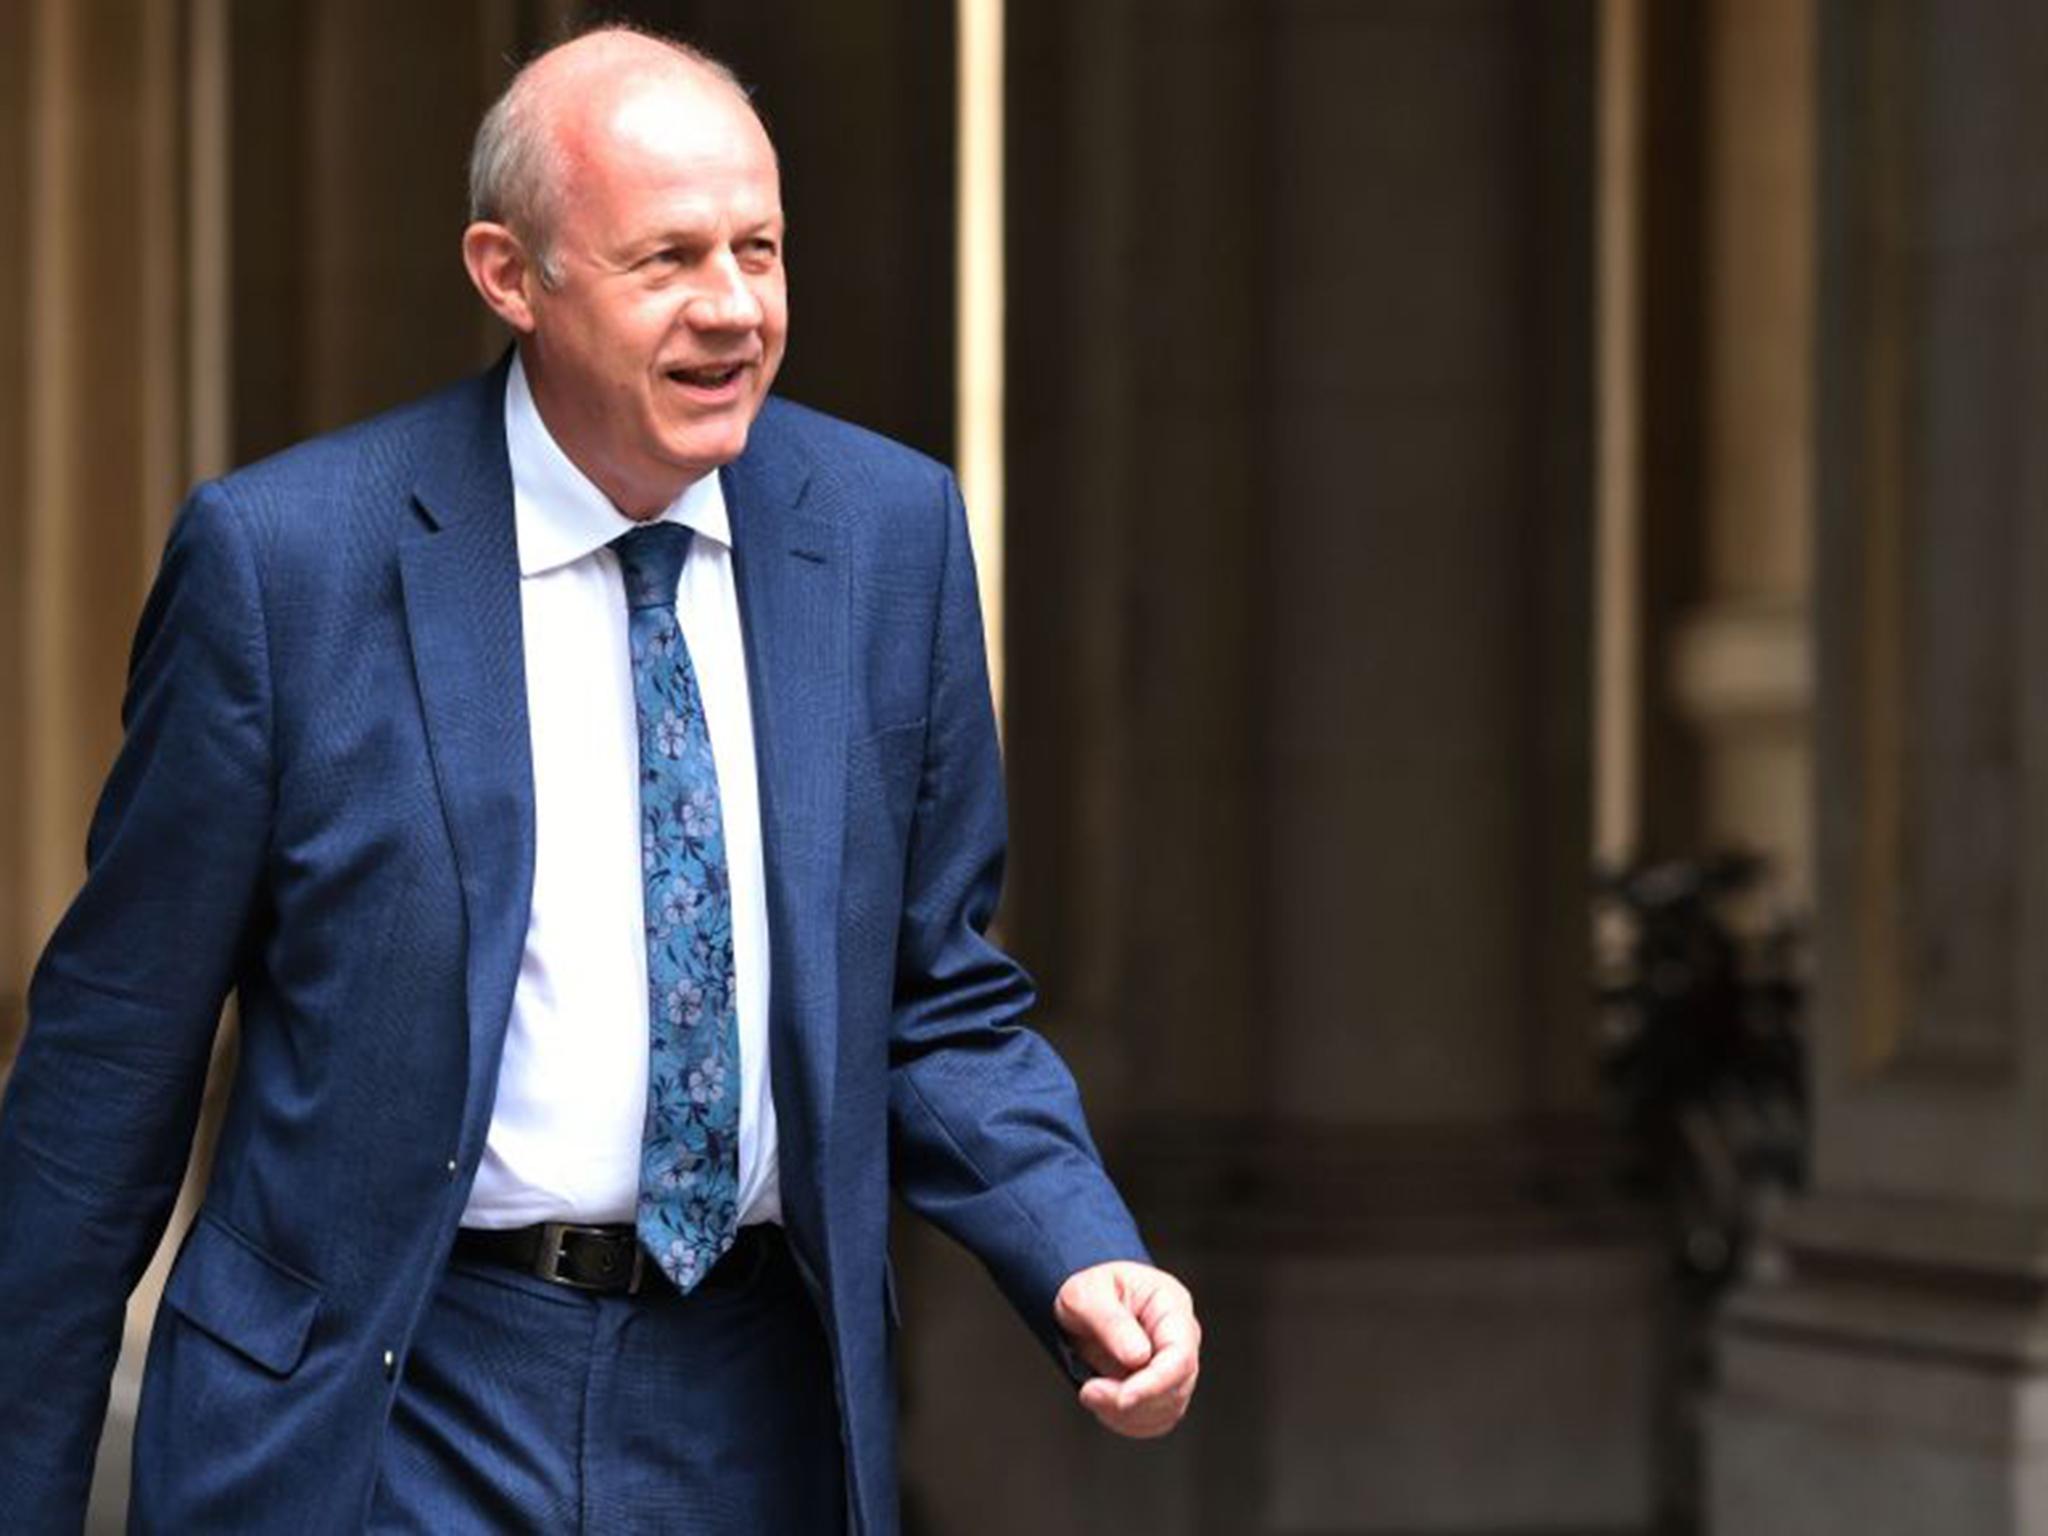 Damian Green is the most senior politician yet to be caught up in a tide of allegations and rumours relating to sexual harassment